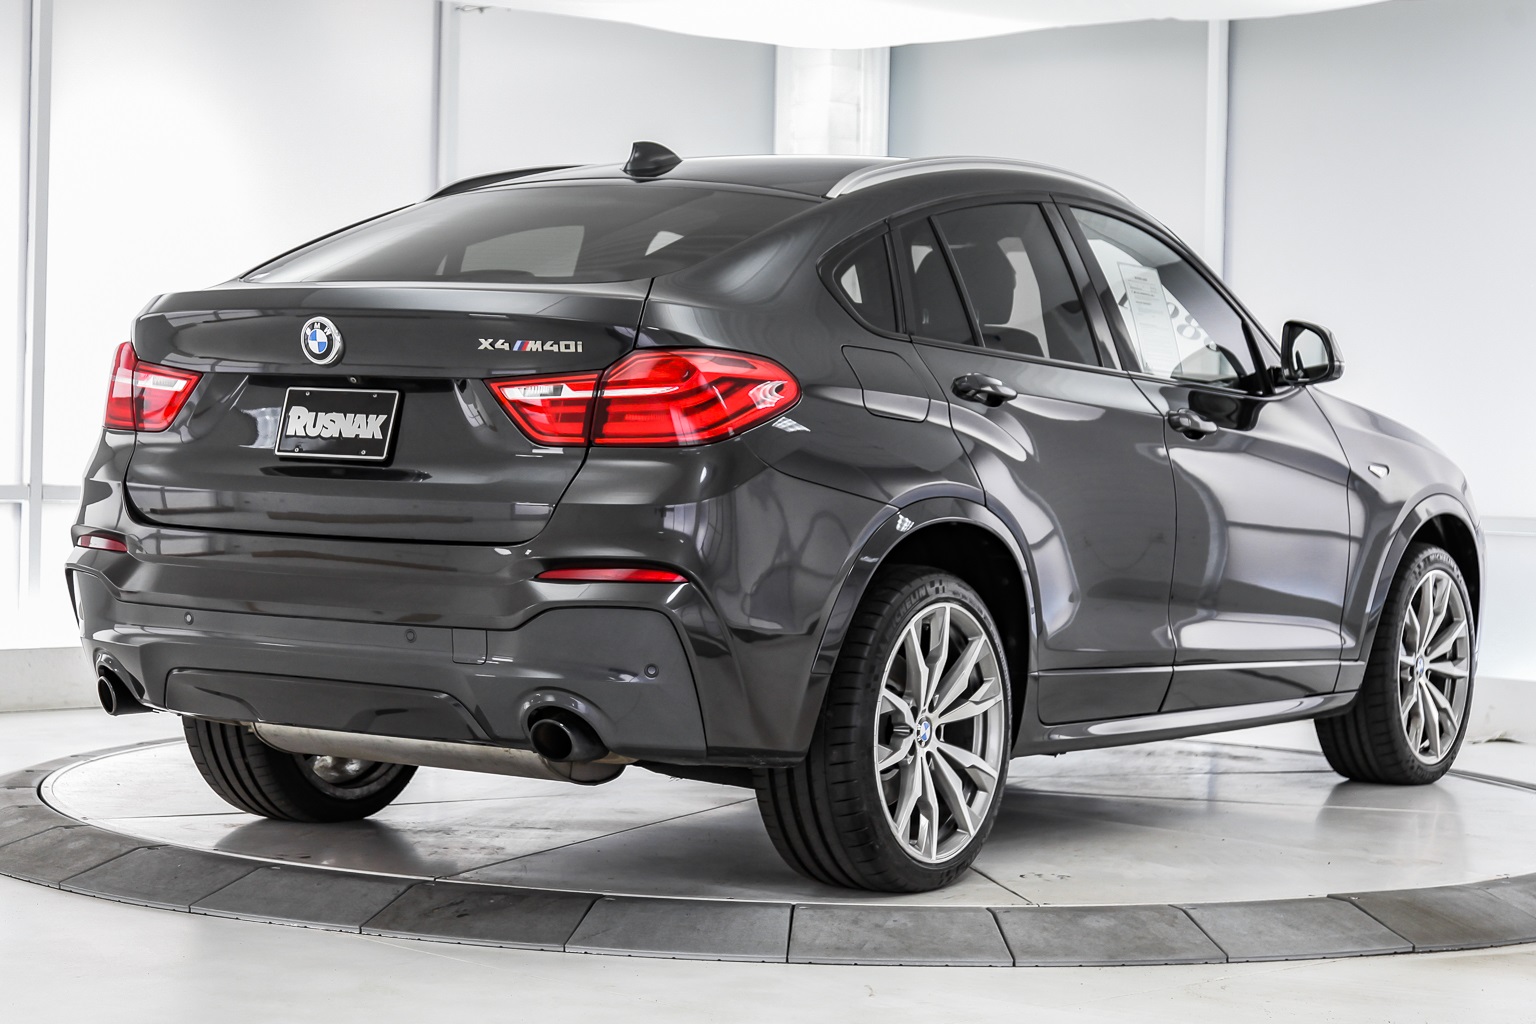 Certified PreOwned 2017 BMW X4 M40i 4D Sport Utility in